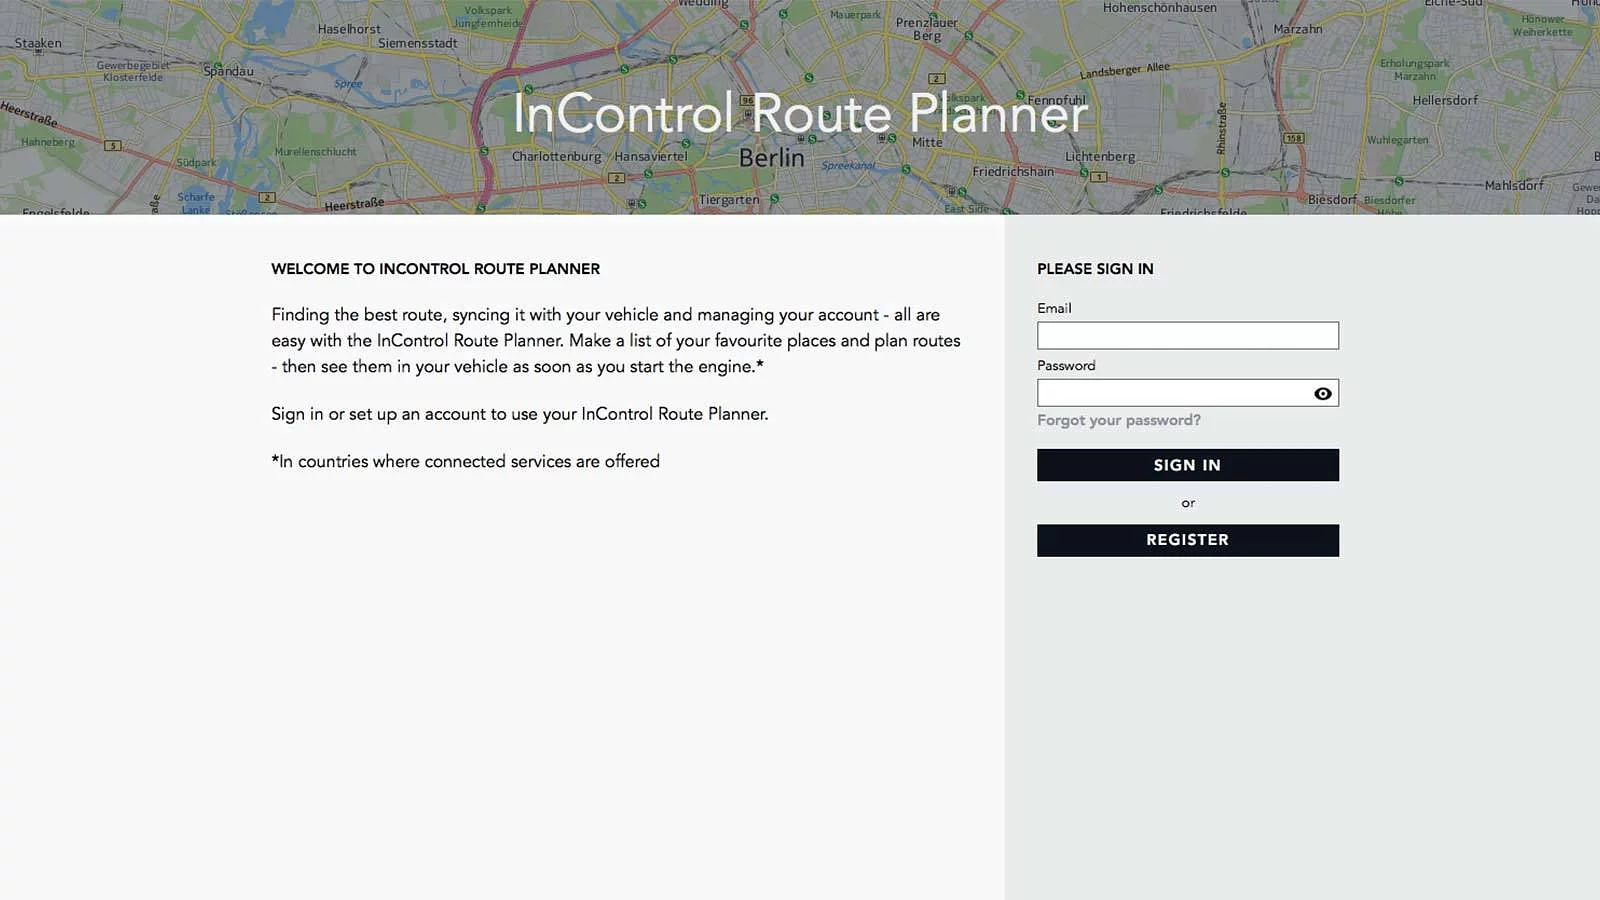 ACEDER AO INCONTROL ROUTE PLANNER